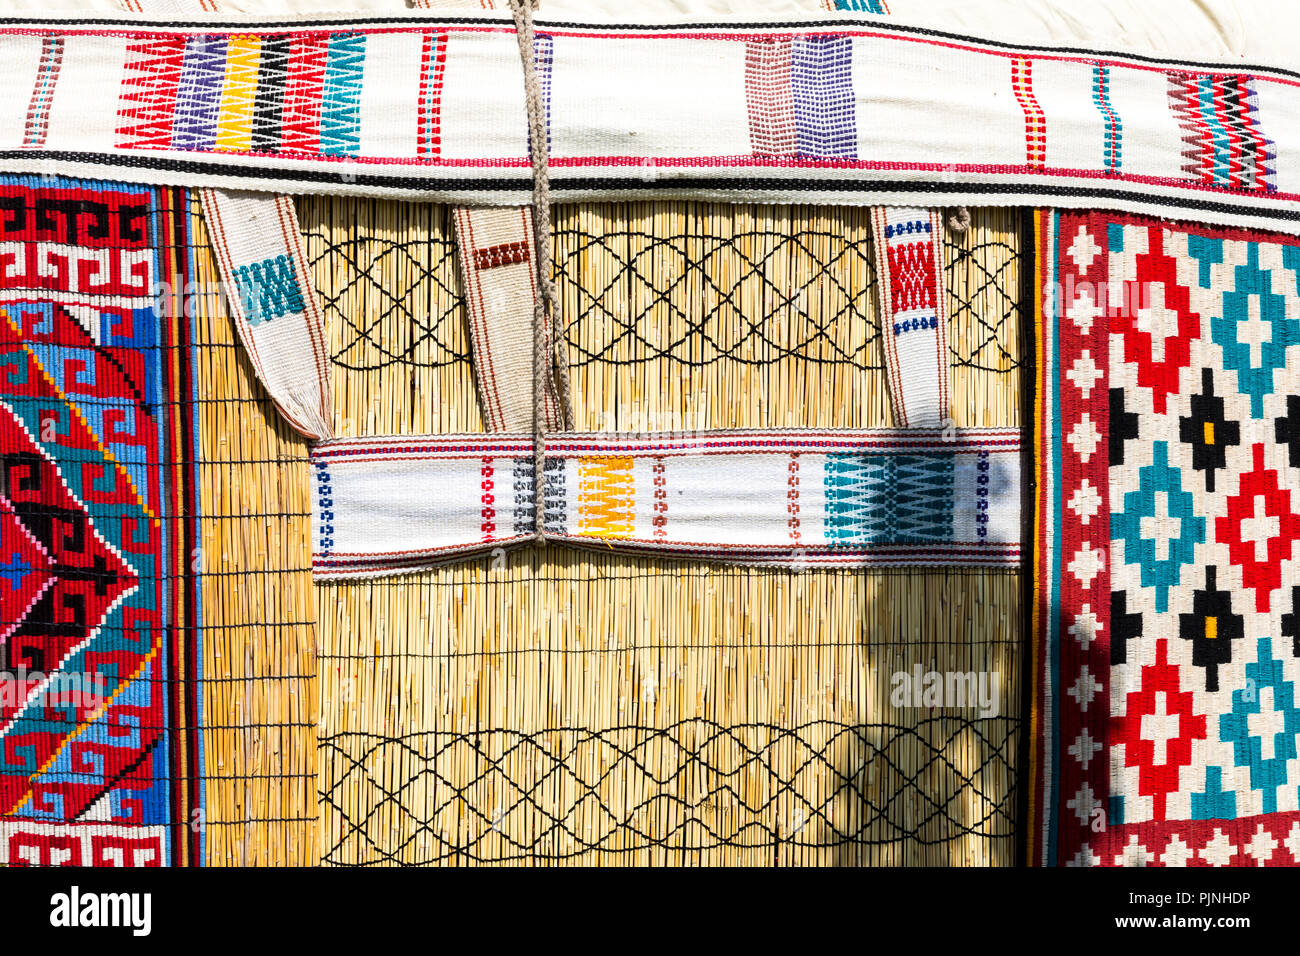 Yurts in Uzbekistan, traditional crafts and patterns. Stock Photo